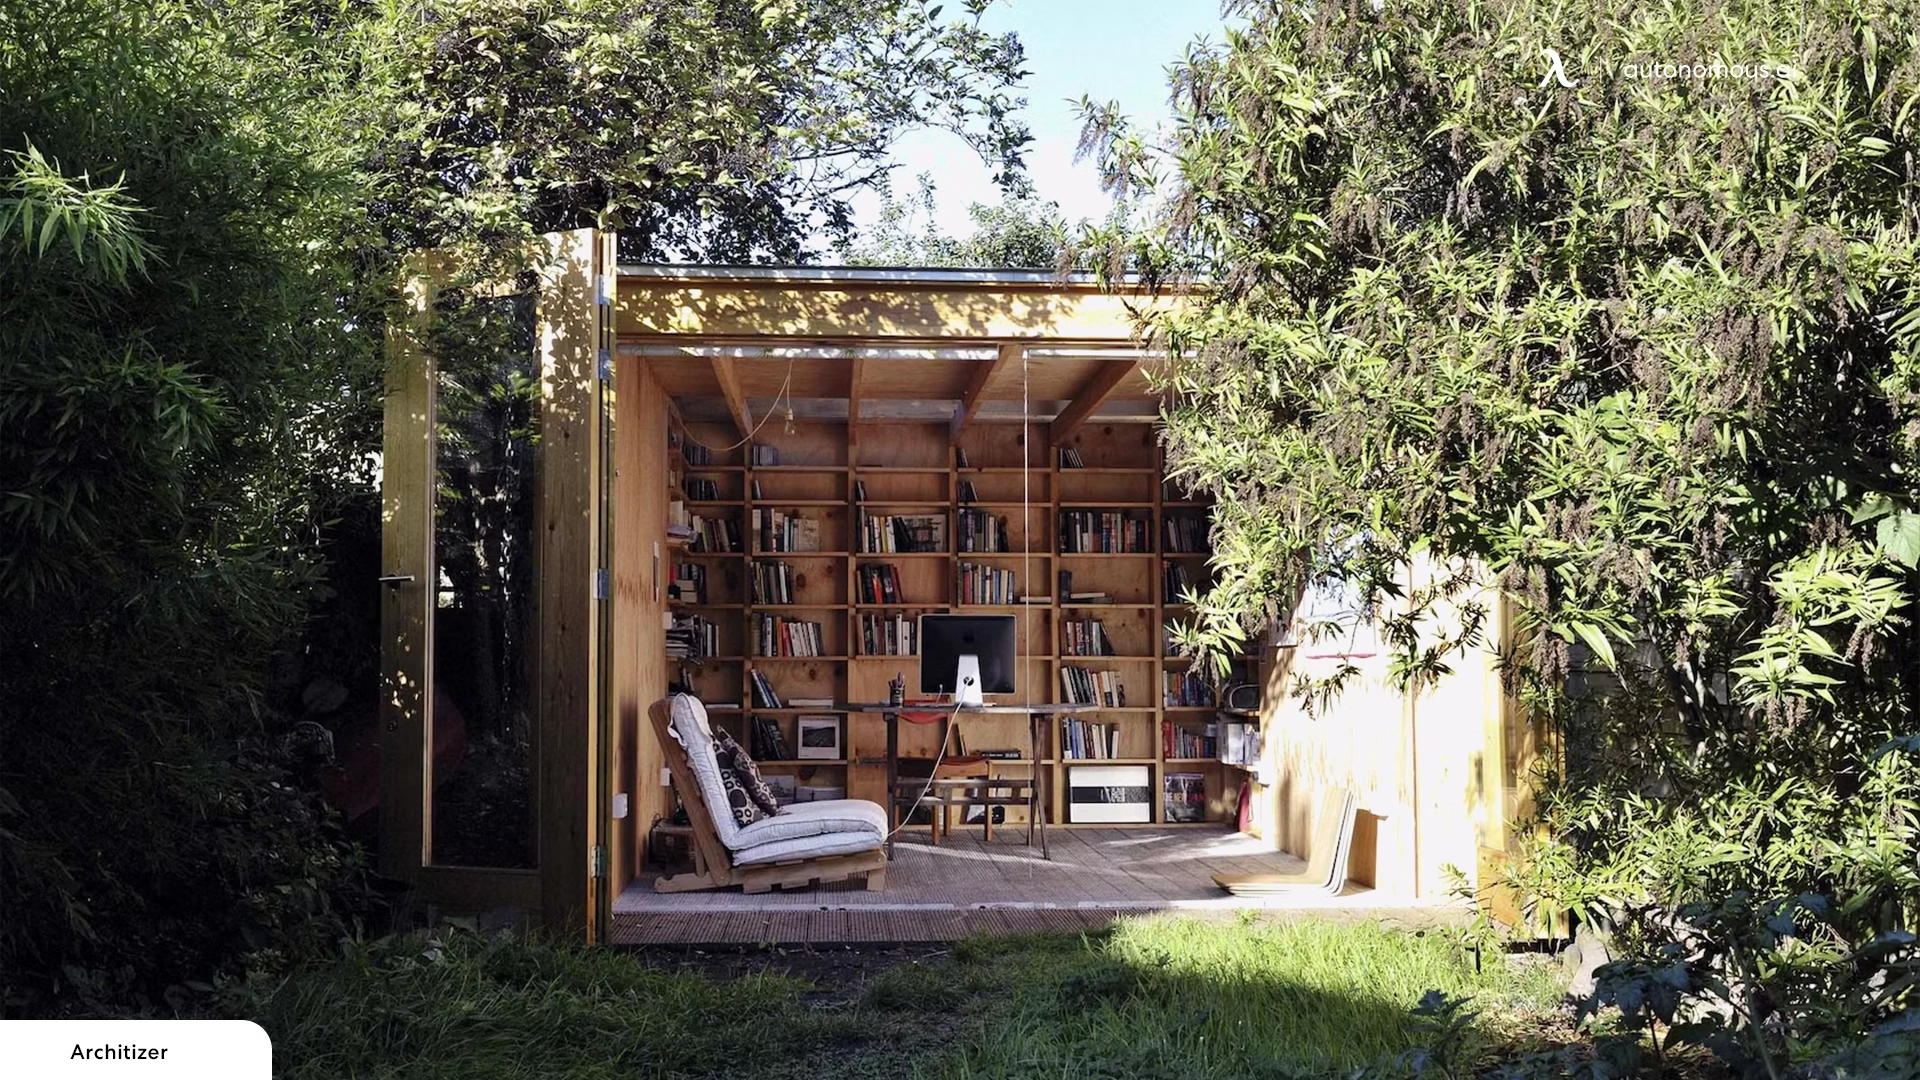 Do You Want a Reading Nook? This Is the Perfect Way to Get One!